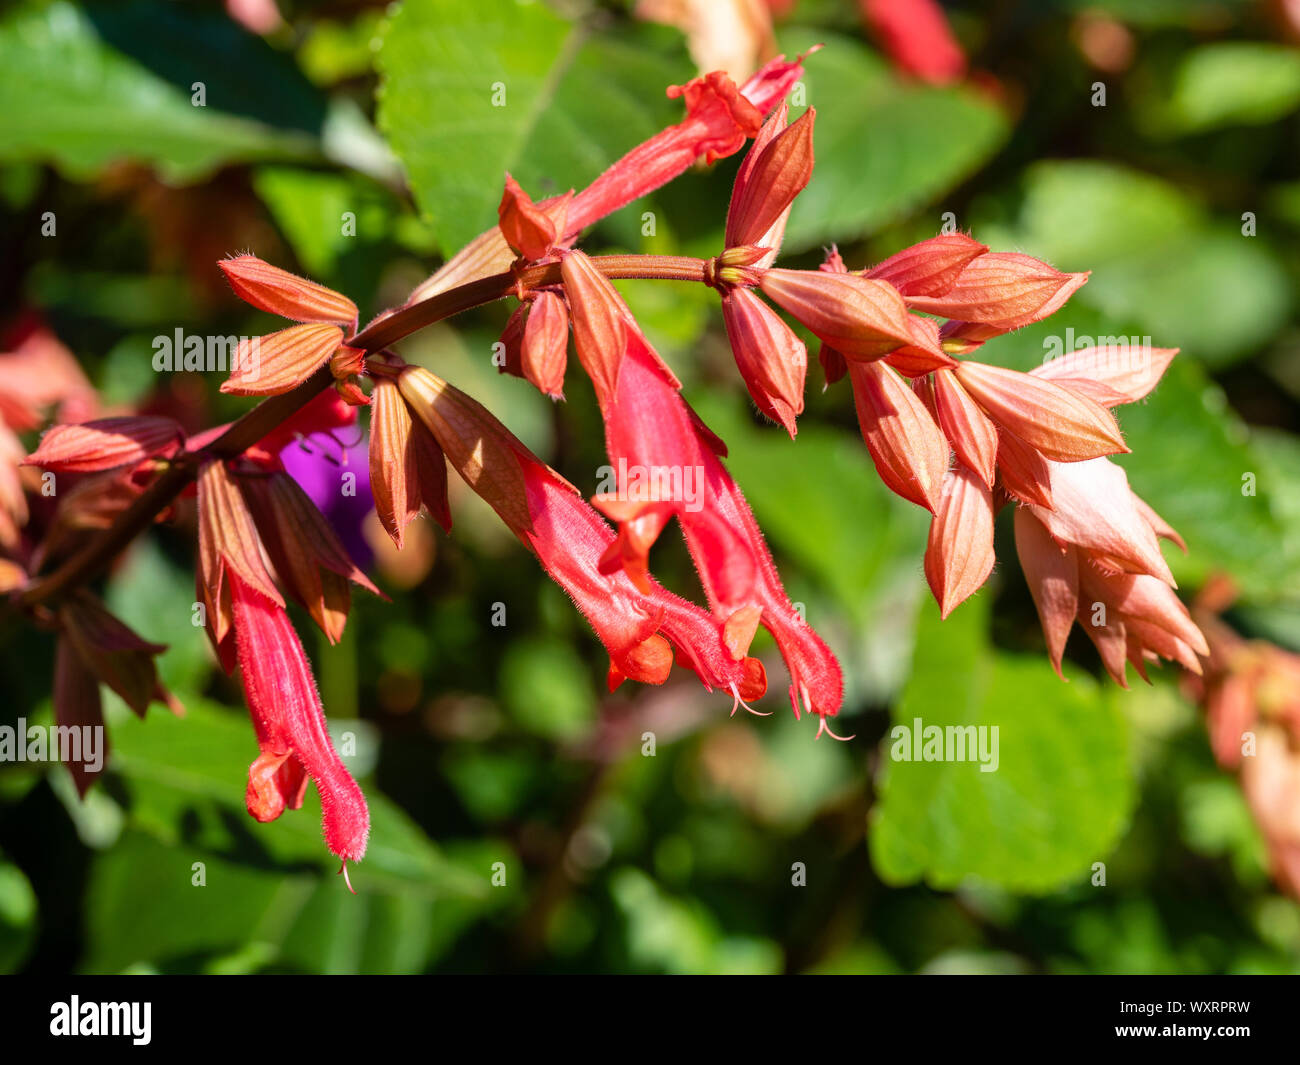 Red flowers and coral calyces in the flower head of the half hardy, shrubby sage, Salvia 'Ember's Wish' Stock Photo